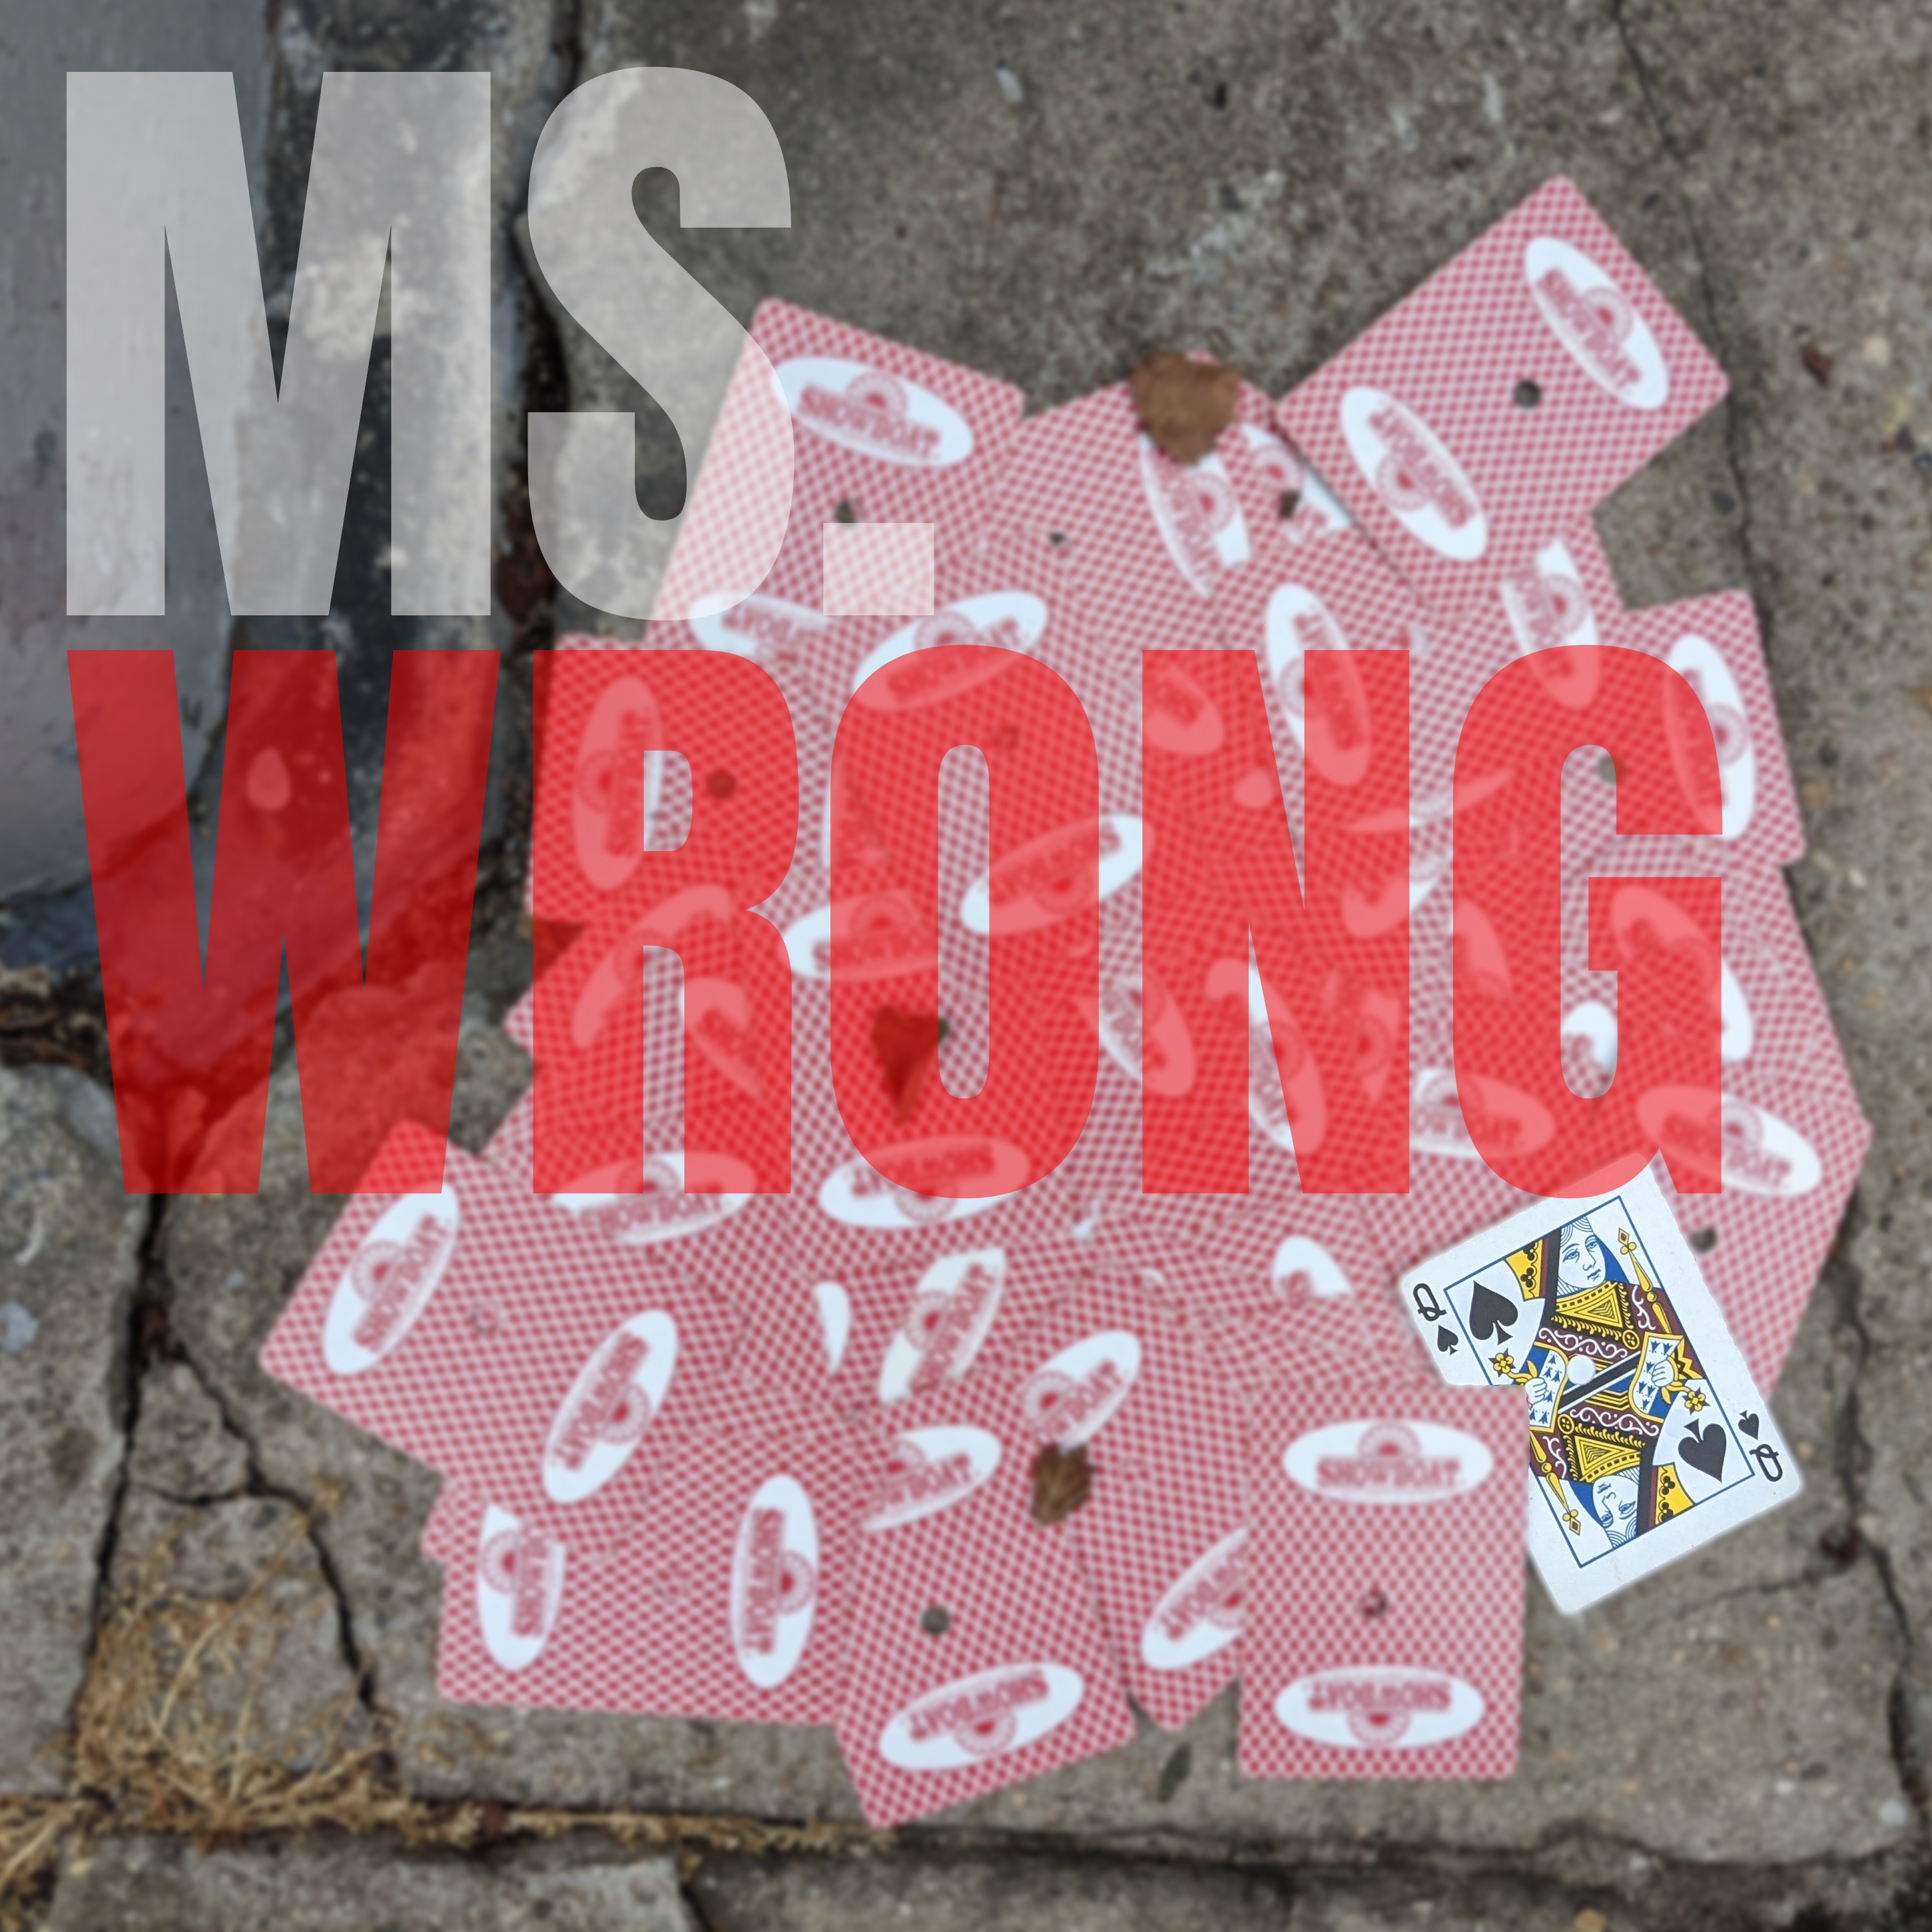 Mike Fuller Shares First Track From Upcoming EP-“Ms. Wrong”